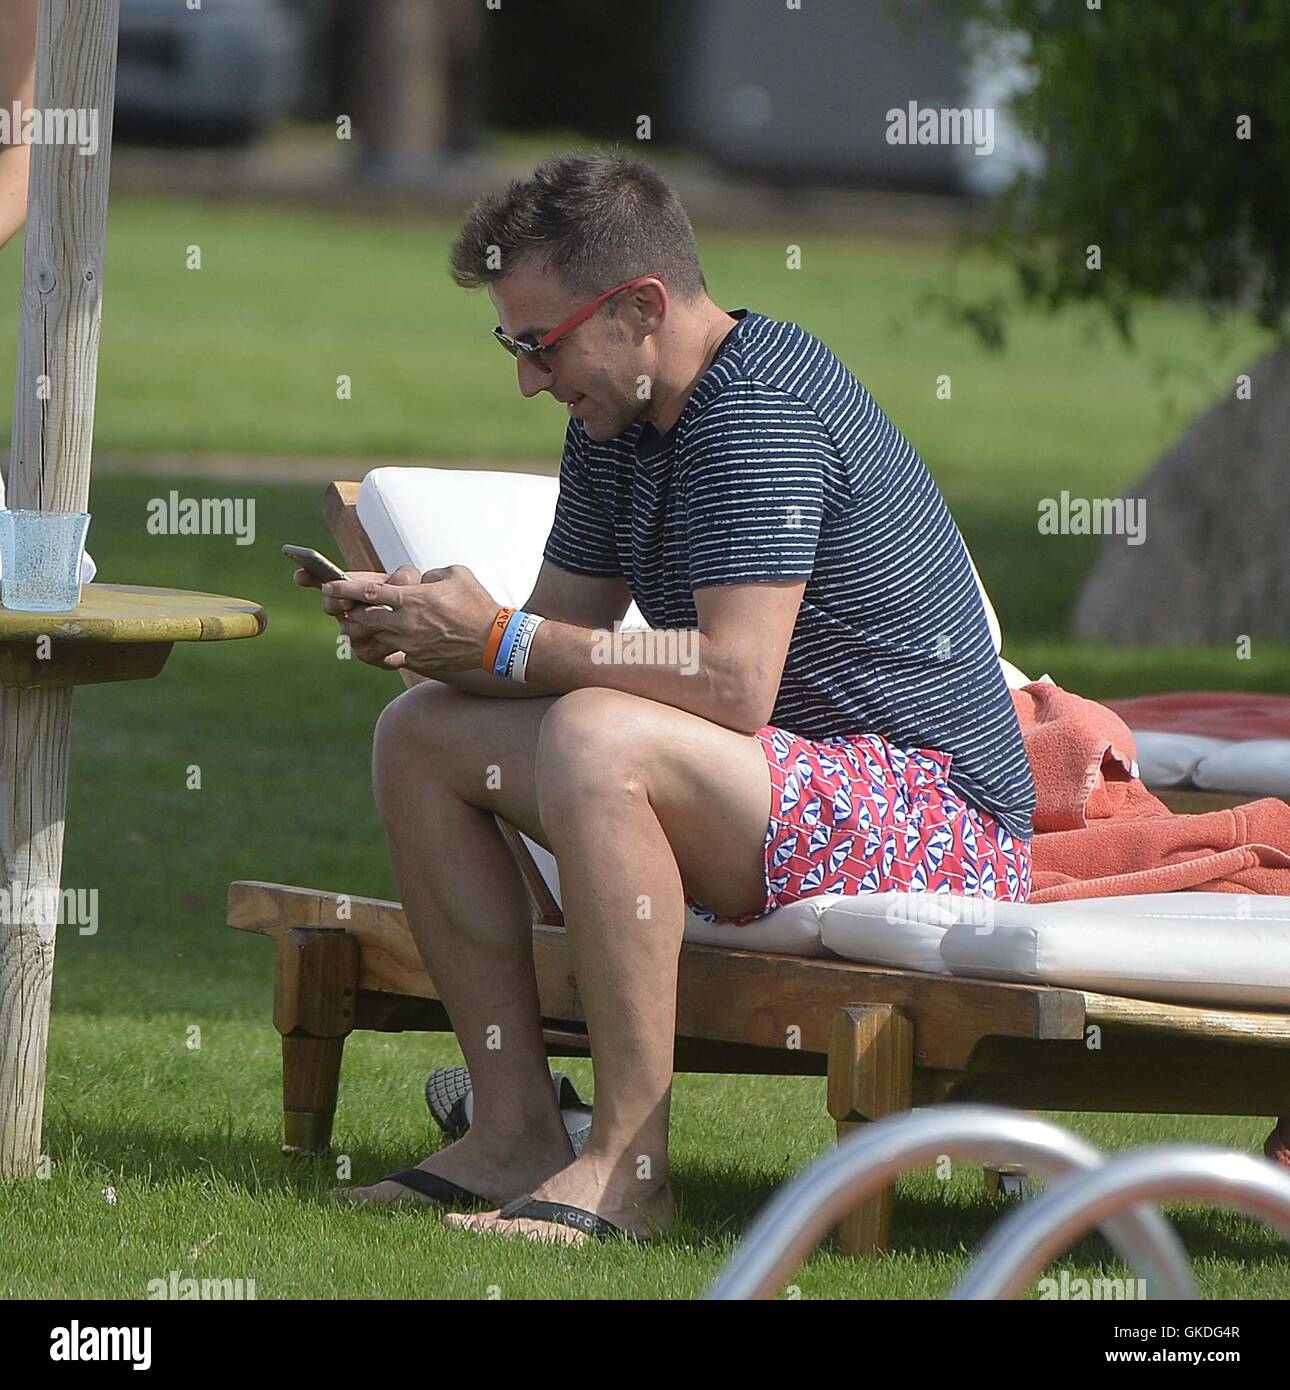 Italian former professional footballer Alessandro Del Piero spends the day on the beach with his family in Porto Cervo, Italy.  Featuring: Alessandro Del Piero, Dorotea Del Piero Where: Porto Cervo, Italy When: 26 Jun 2016 Credit: IPA/WENN.com  **Only ava Stock Photo